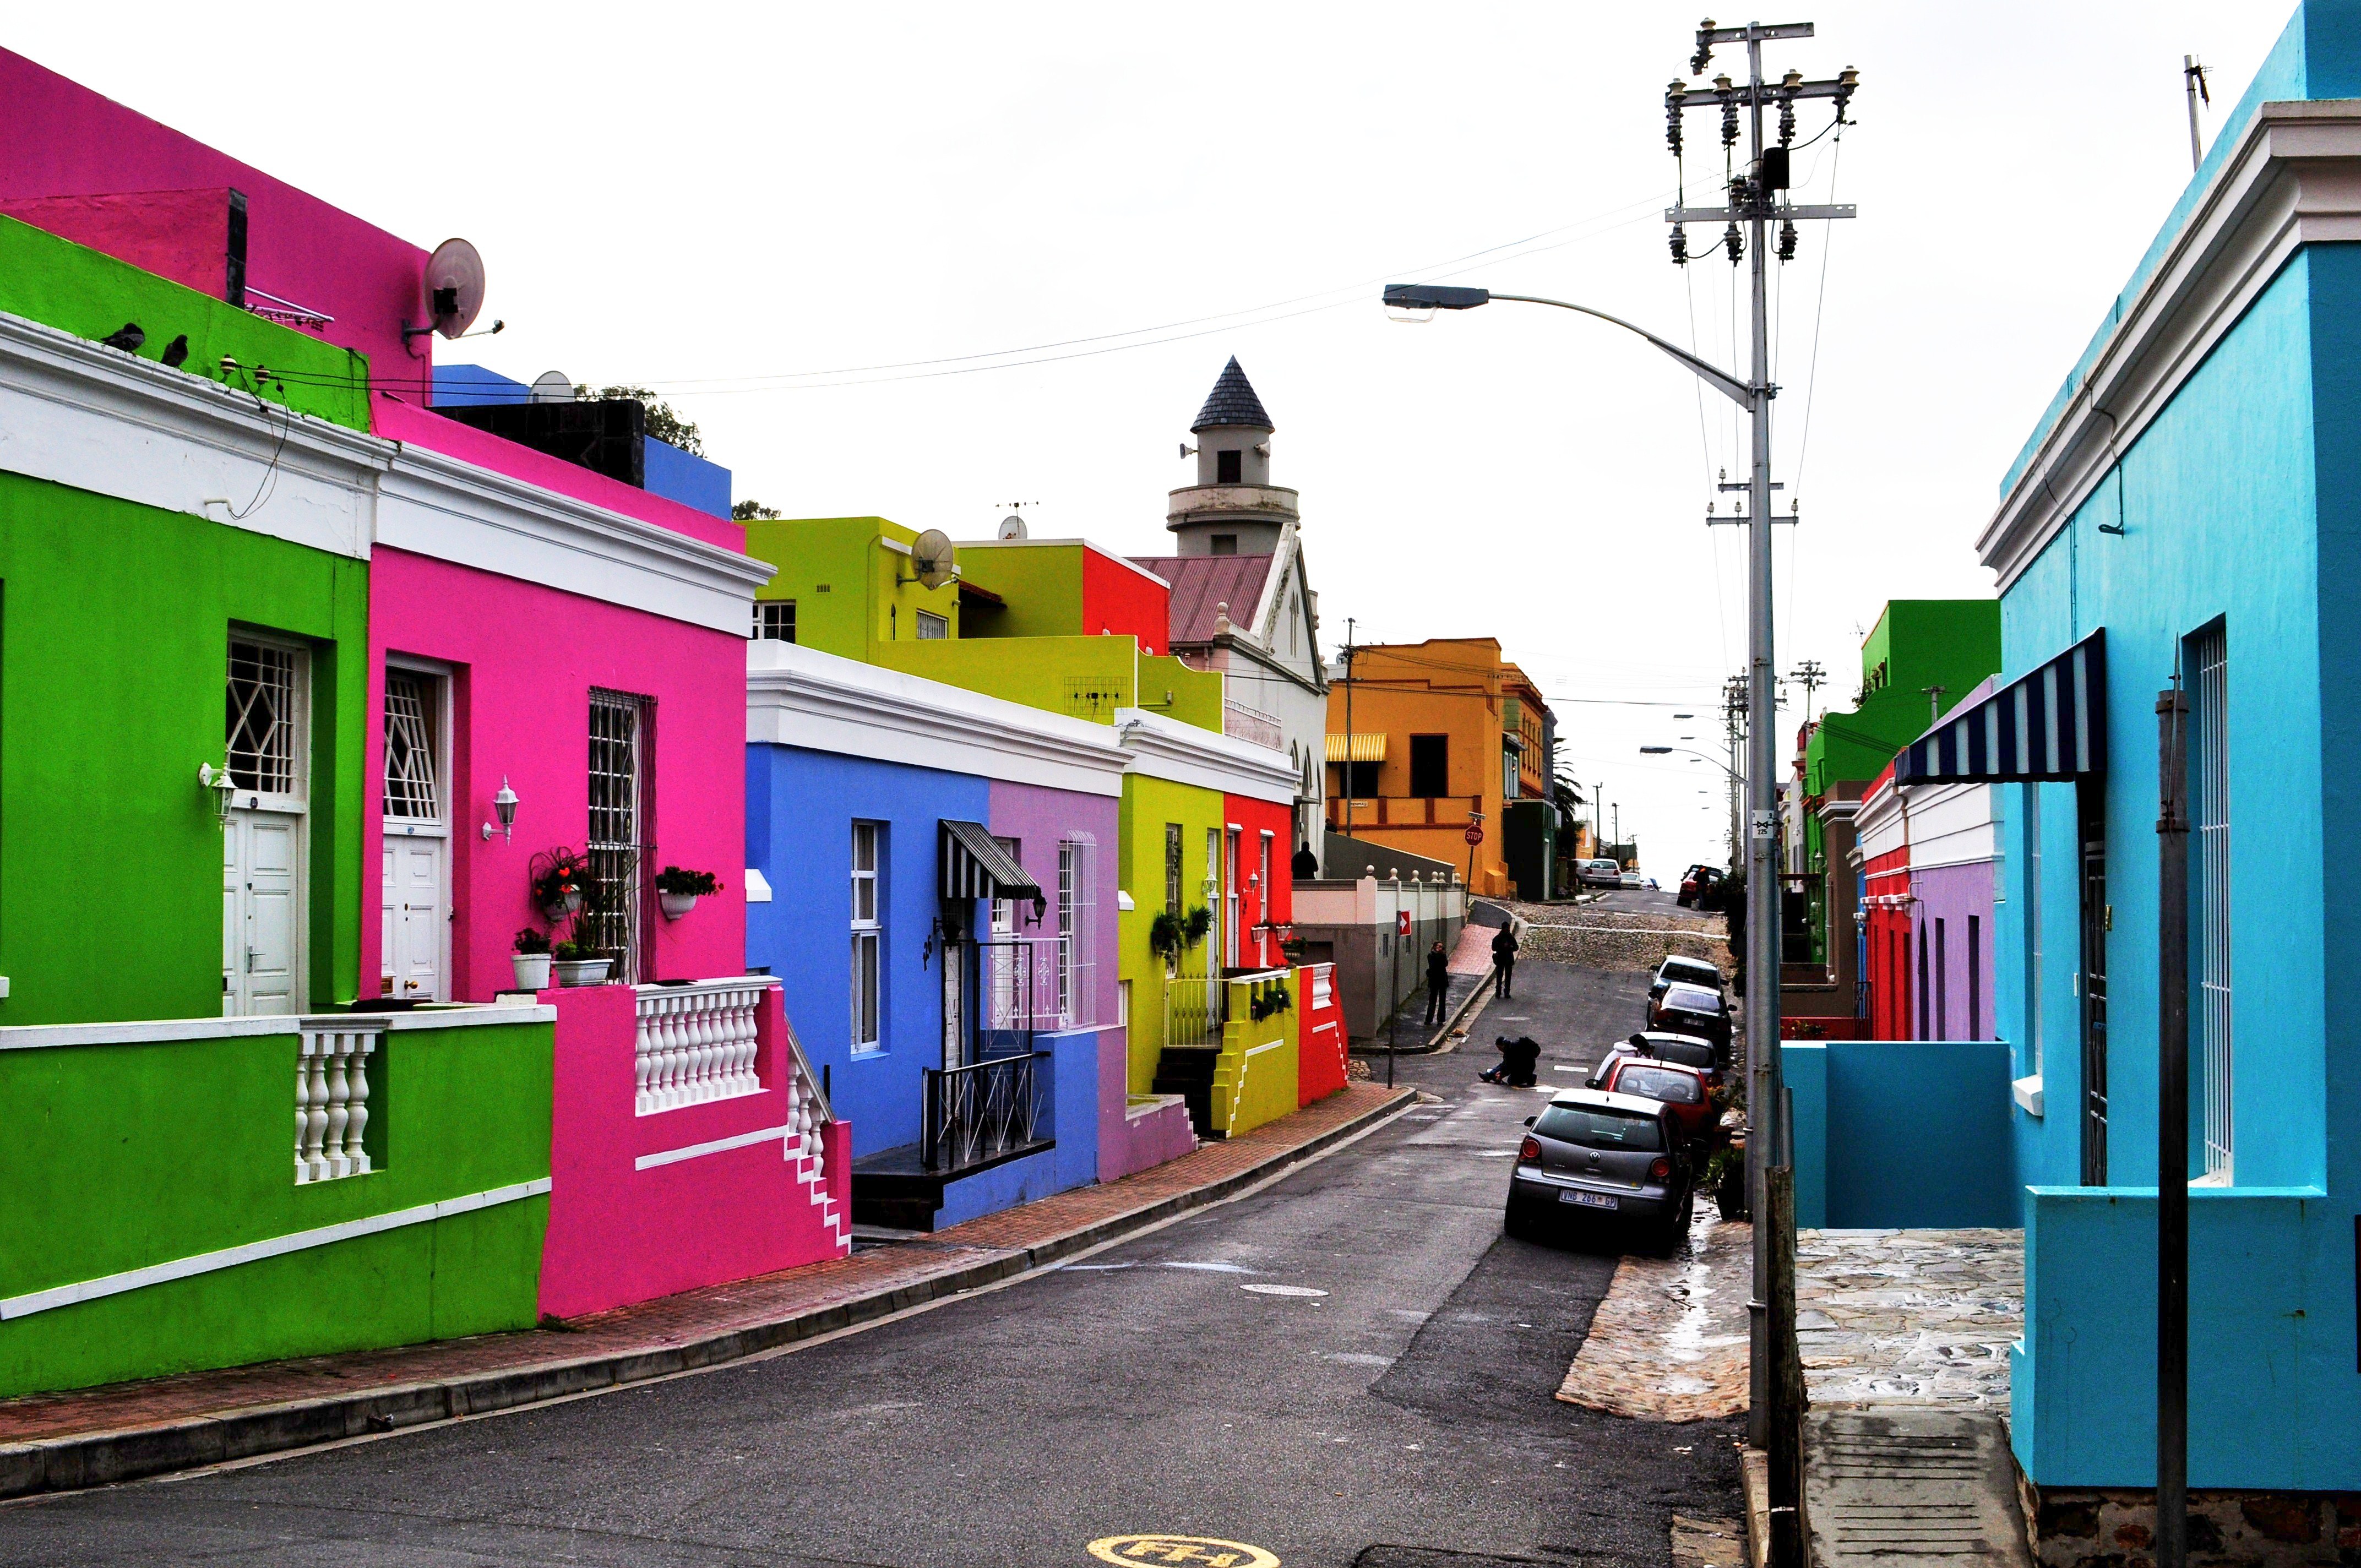 South Africa: Explore Bo-Kaap, the colorful historic district!